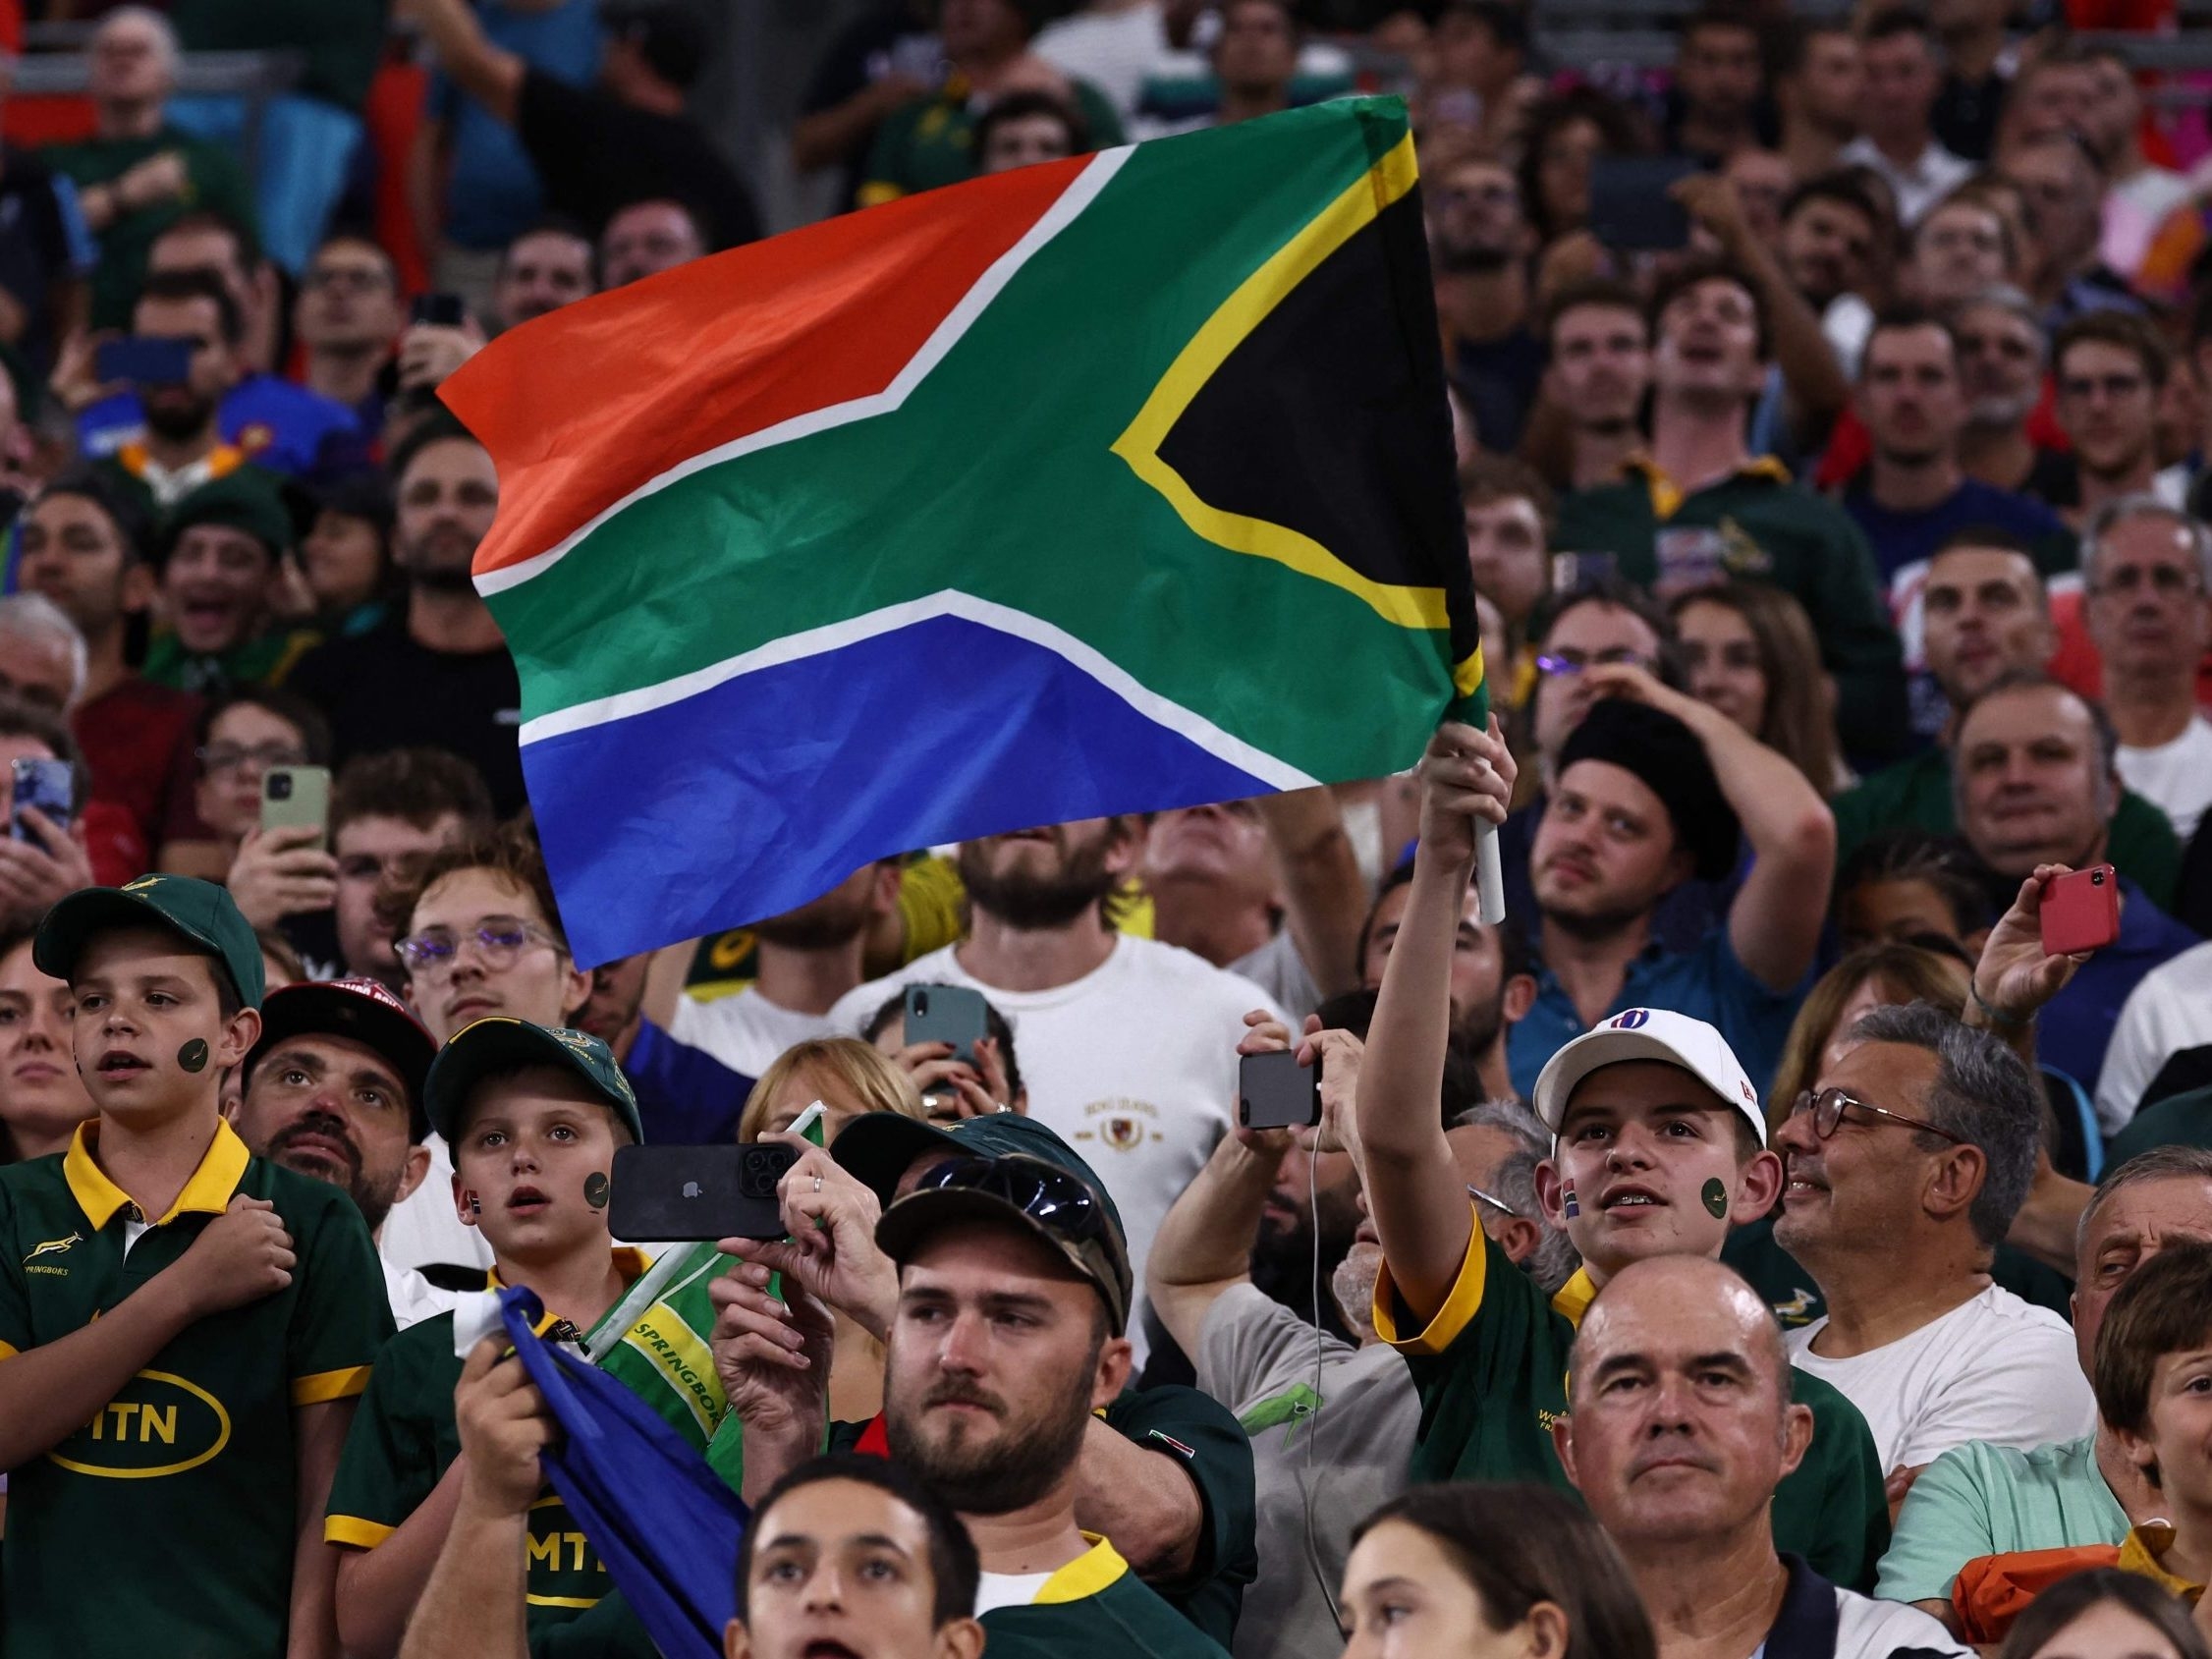 South Africa involved in double World Cup flag flap